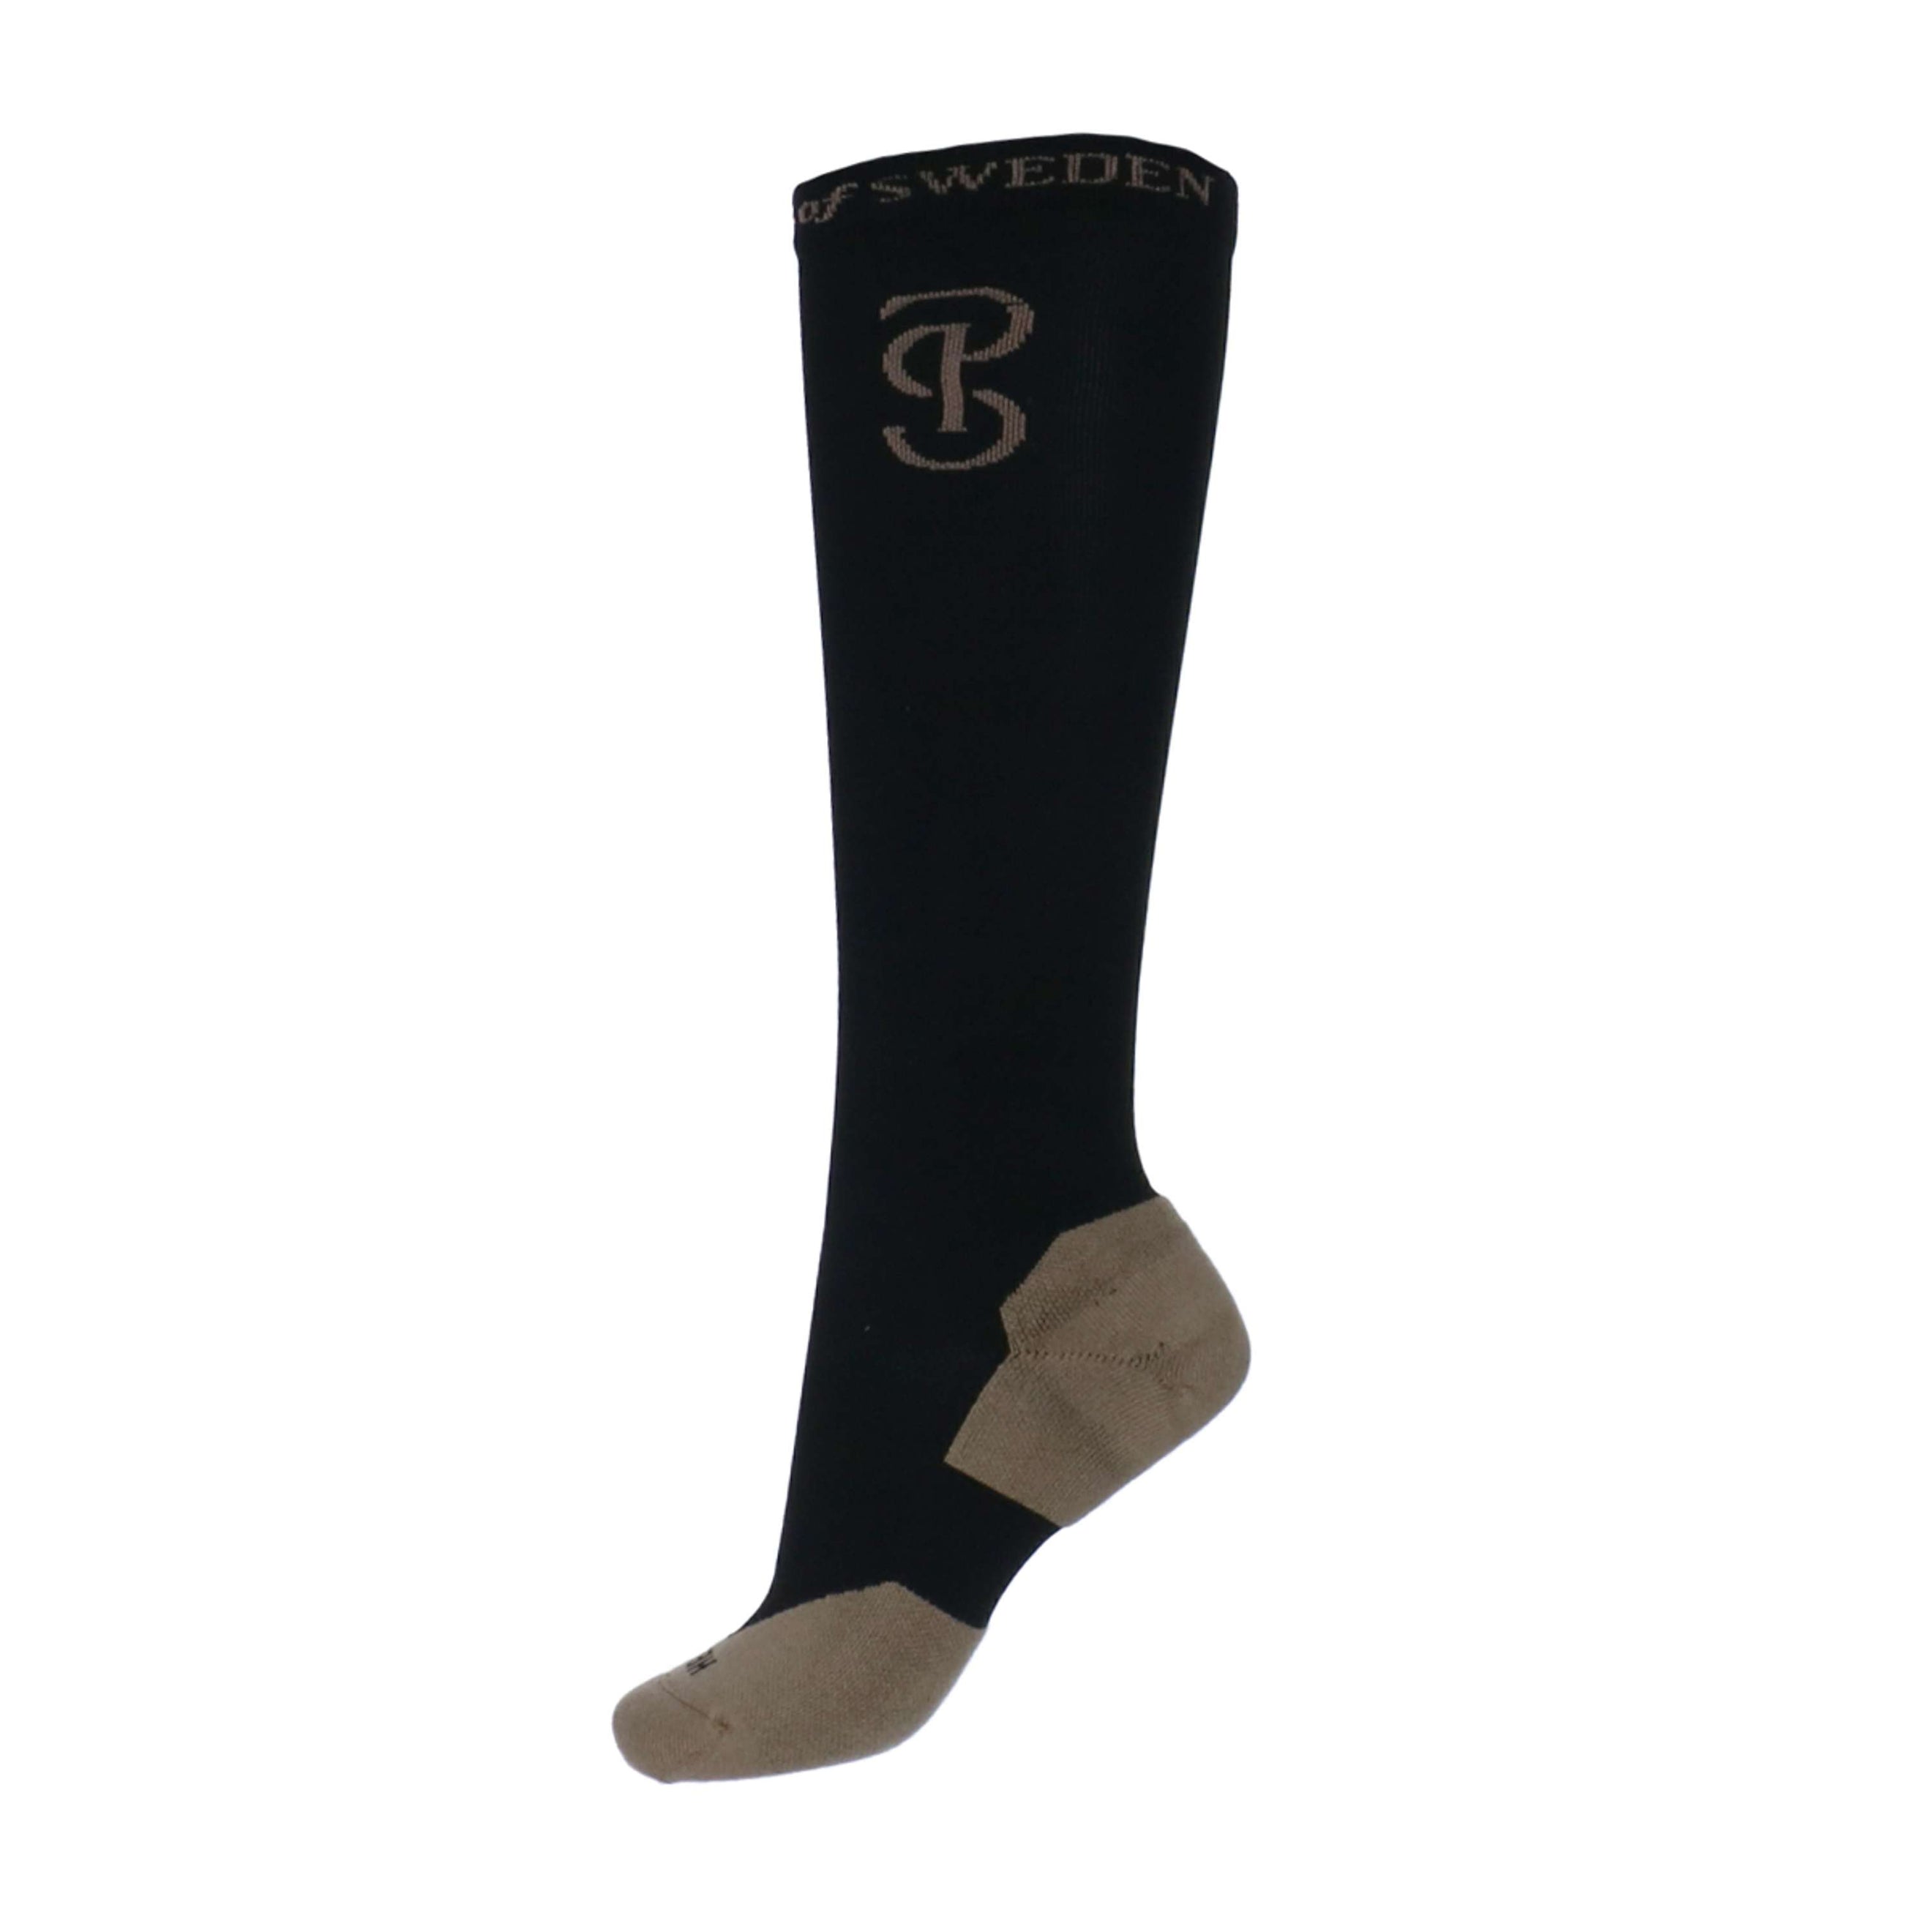 PS of Sweden Chaussettes Holly 2-pack Noir